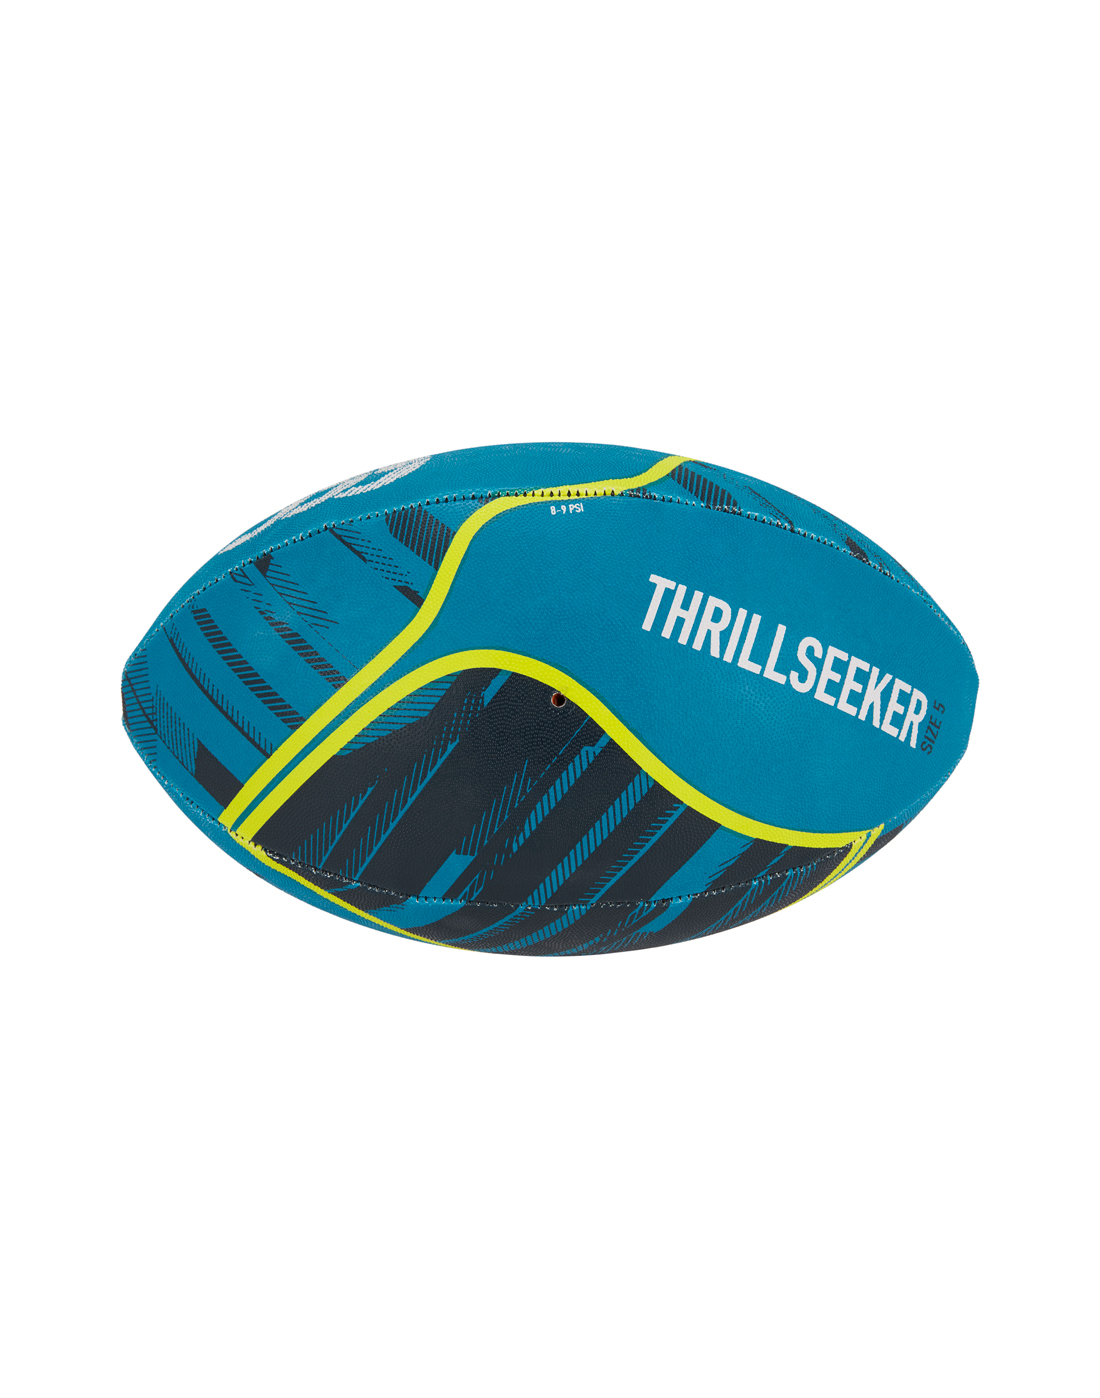 Canterbury Thrillseeker Rugby Ball | Blue | Life Style Sports